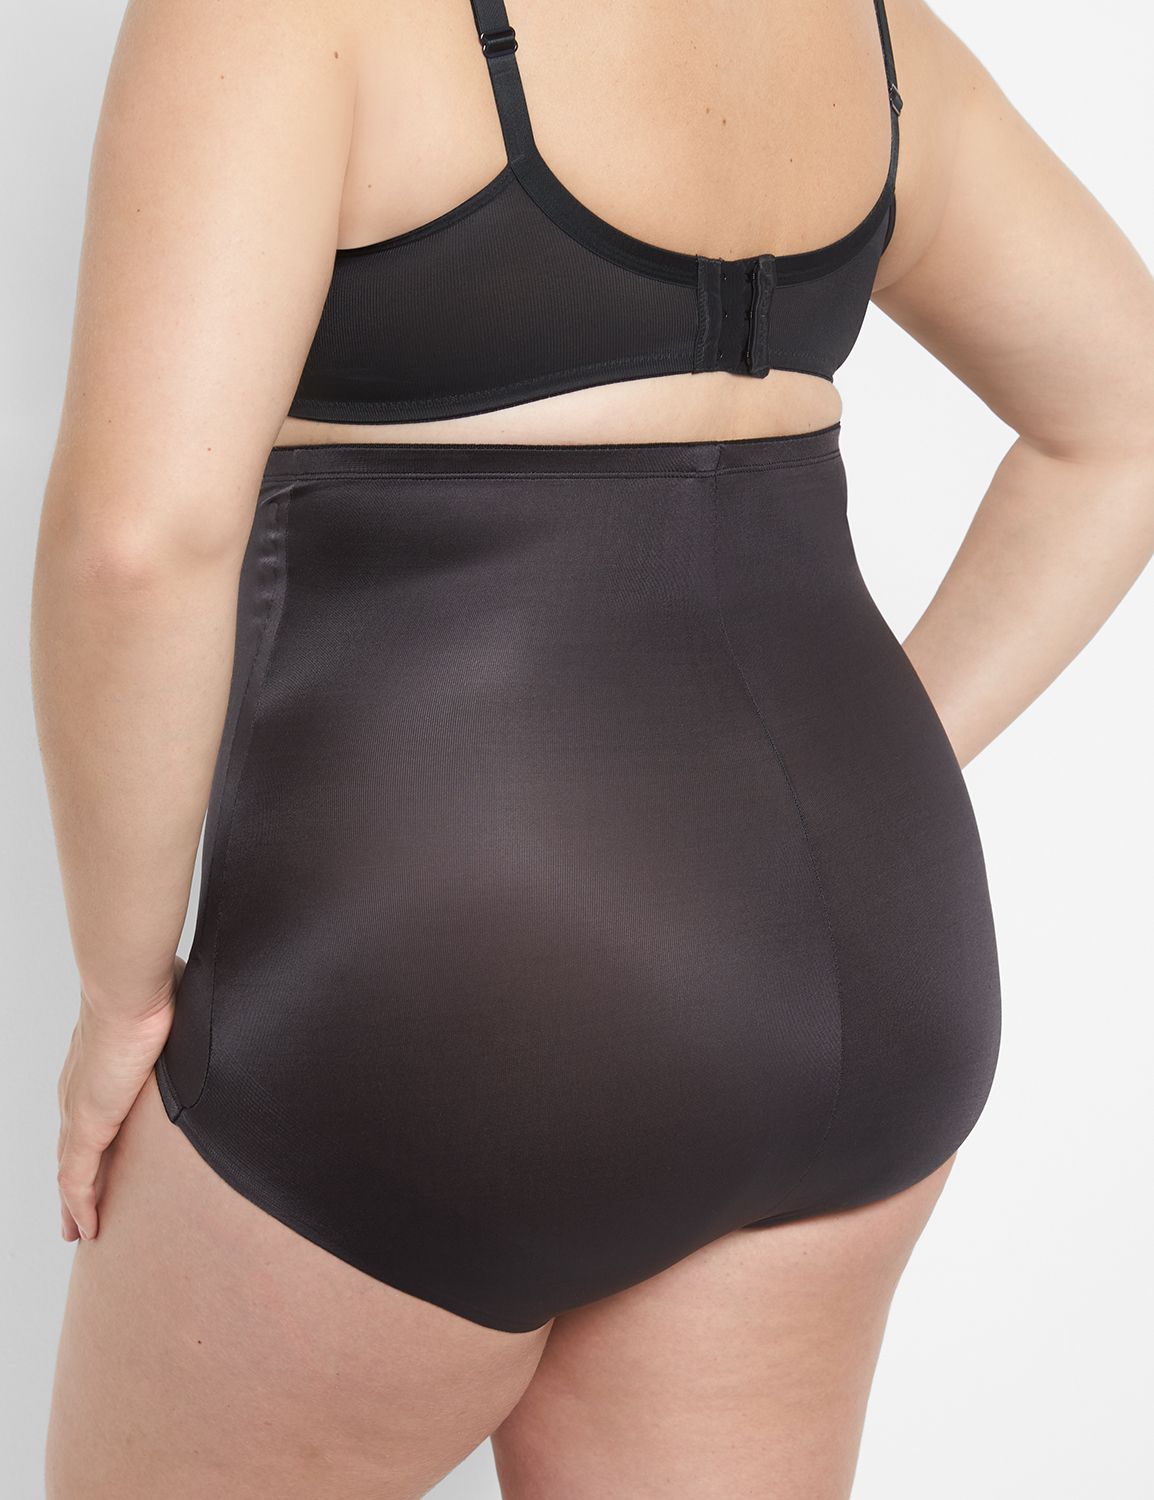 LANE BRYANT CACIQUE CONTROL WEAR BLACK HIGH WAIST BRIEF SHAPER WITH LACE  18/20